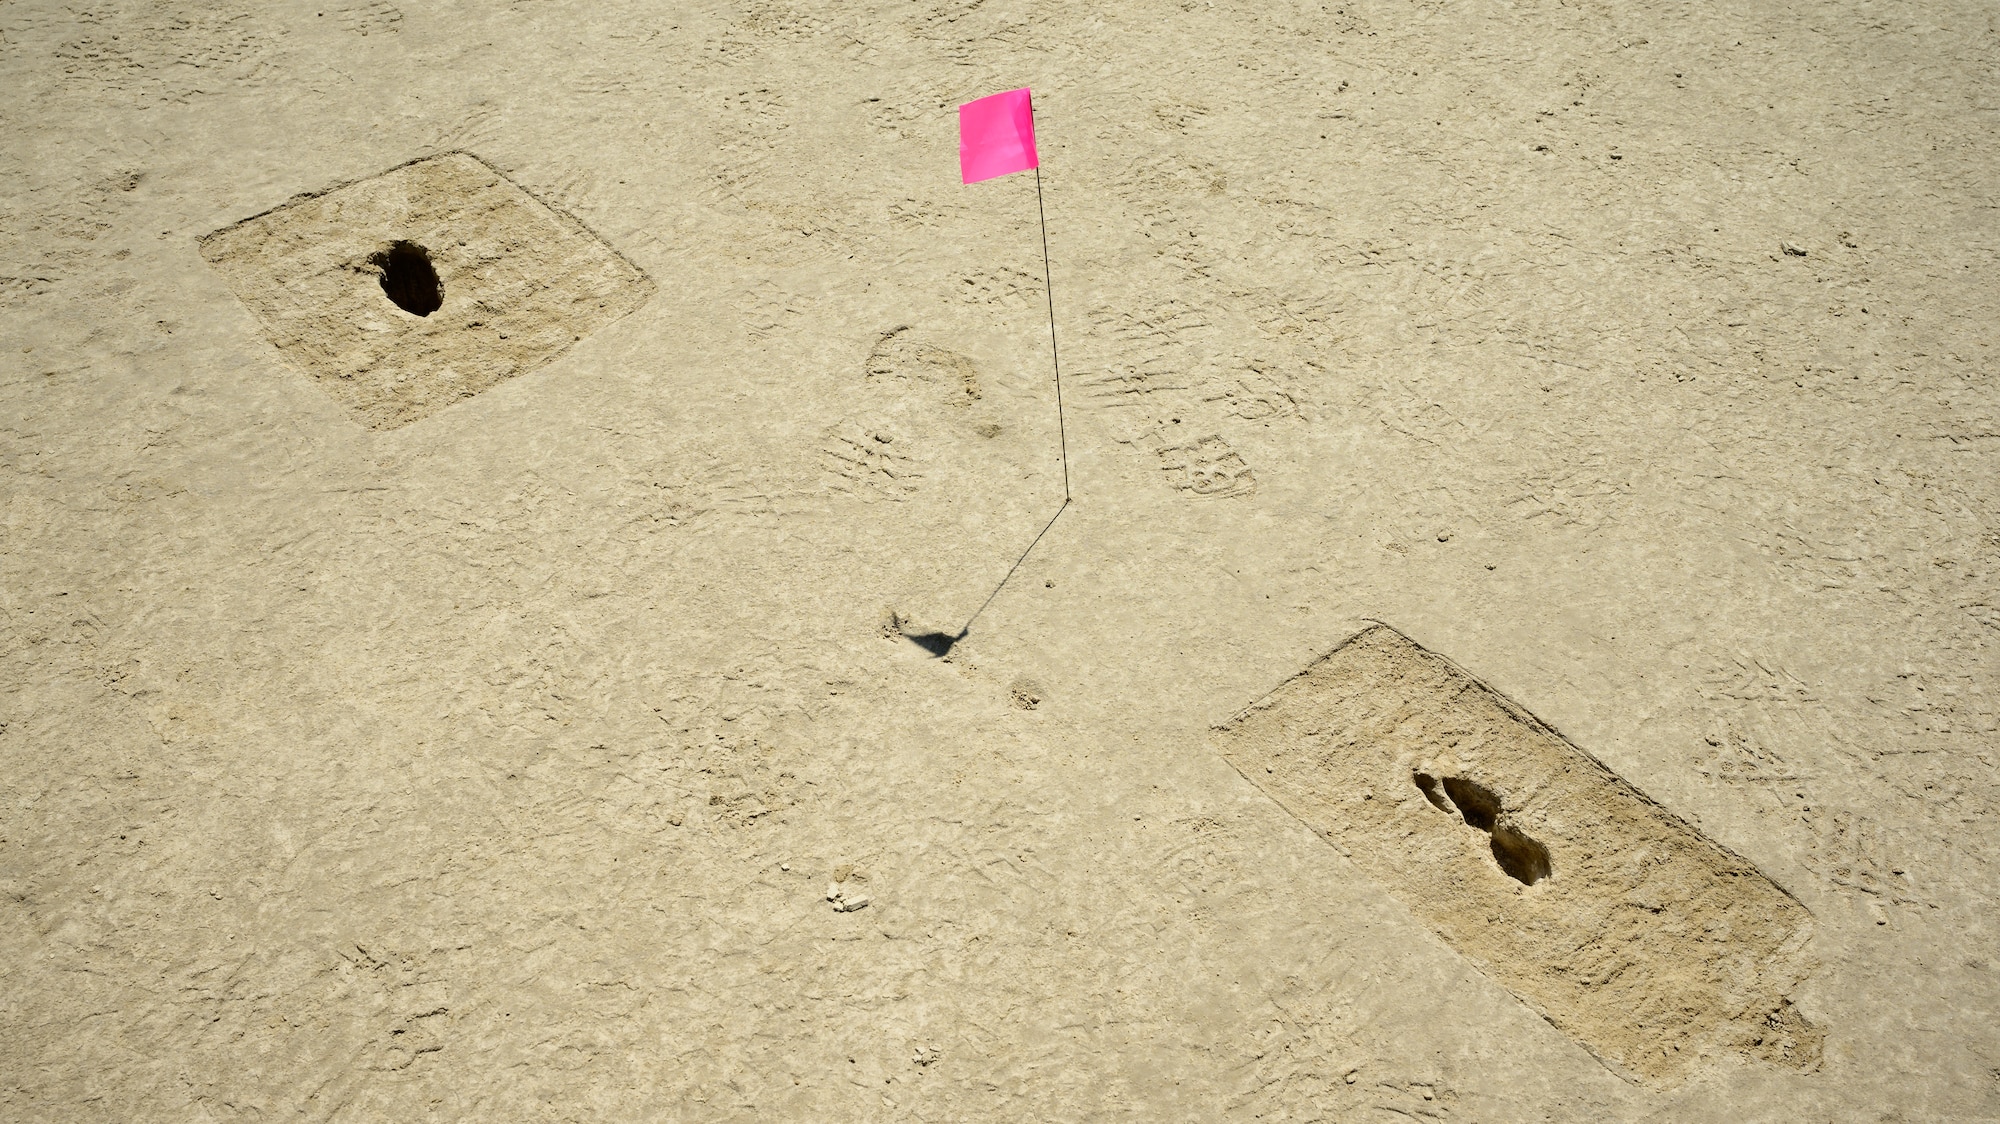 Footprints appear on an archaeological site marked with a pink pin flag.